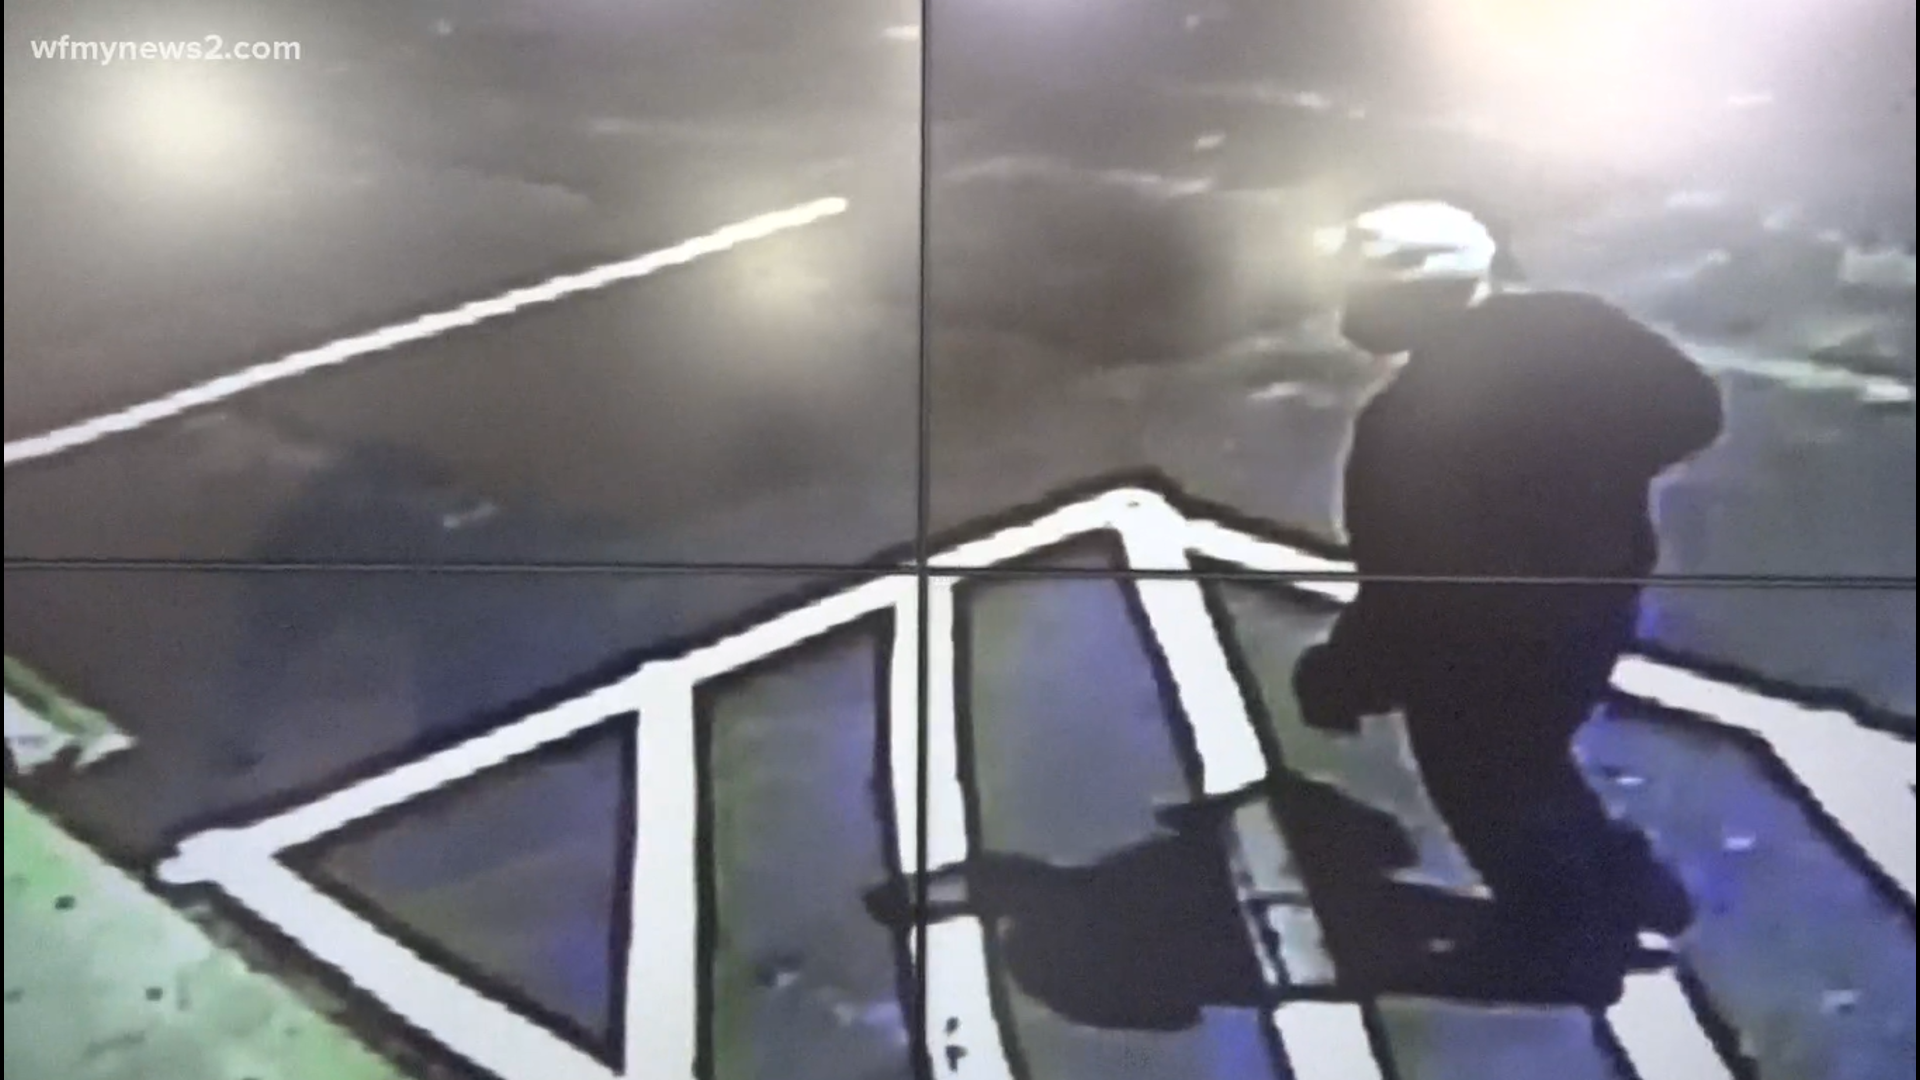 A man broke into Taylor's Discount Tire and Auto in Greensboro. Surveillance cameras got it all on tape.